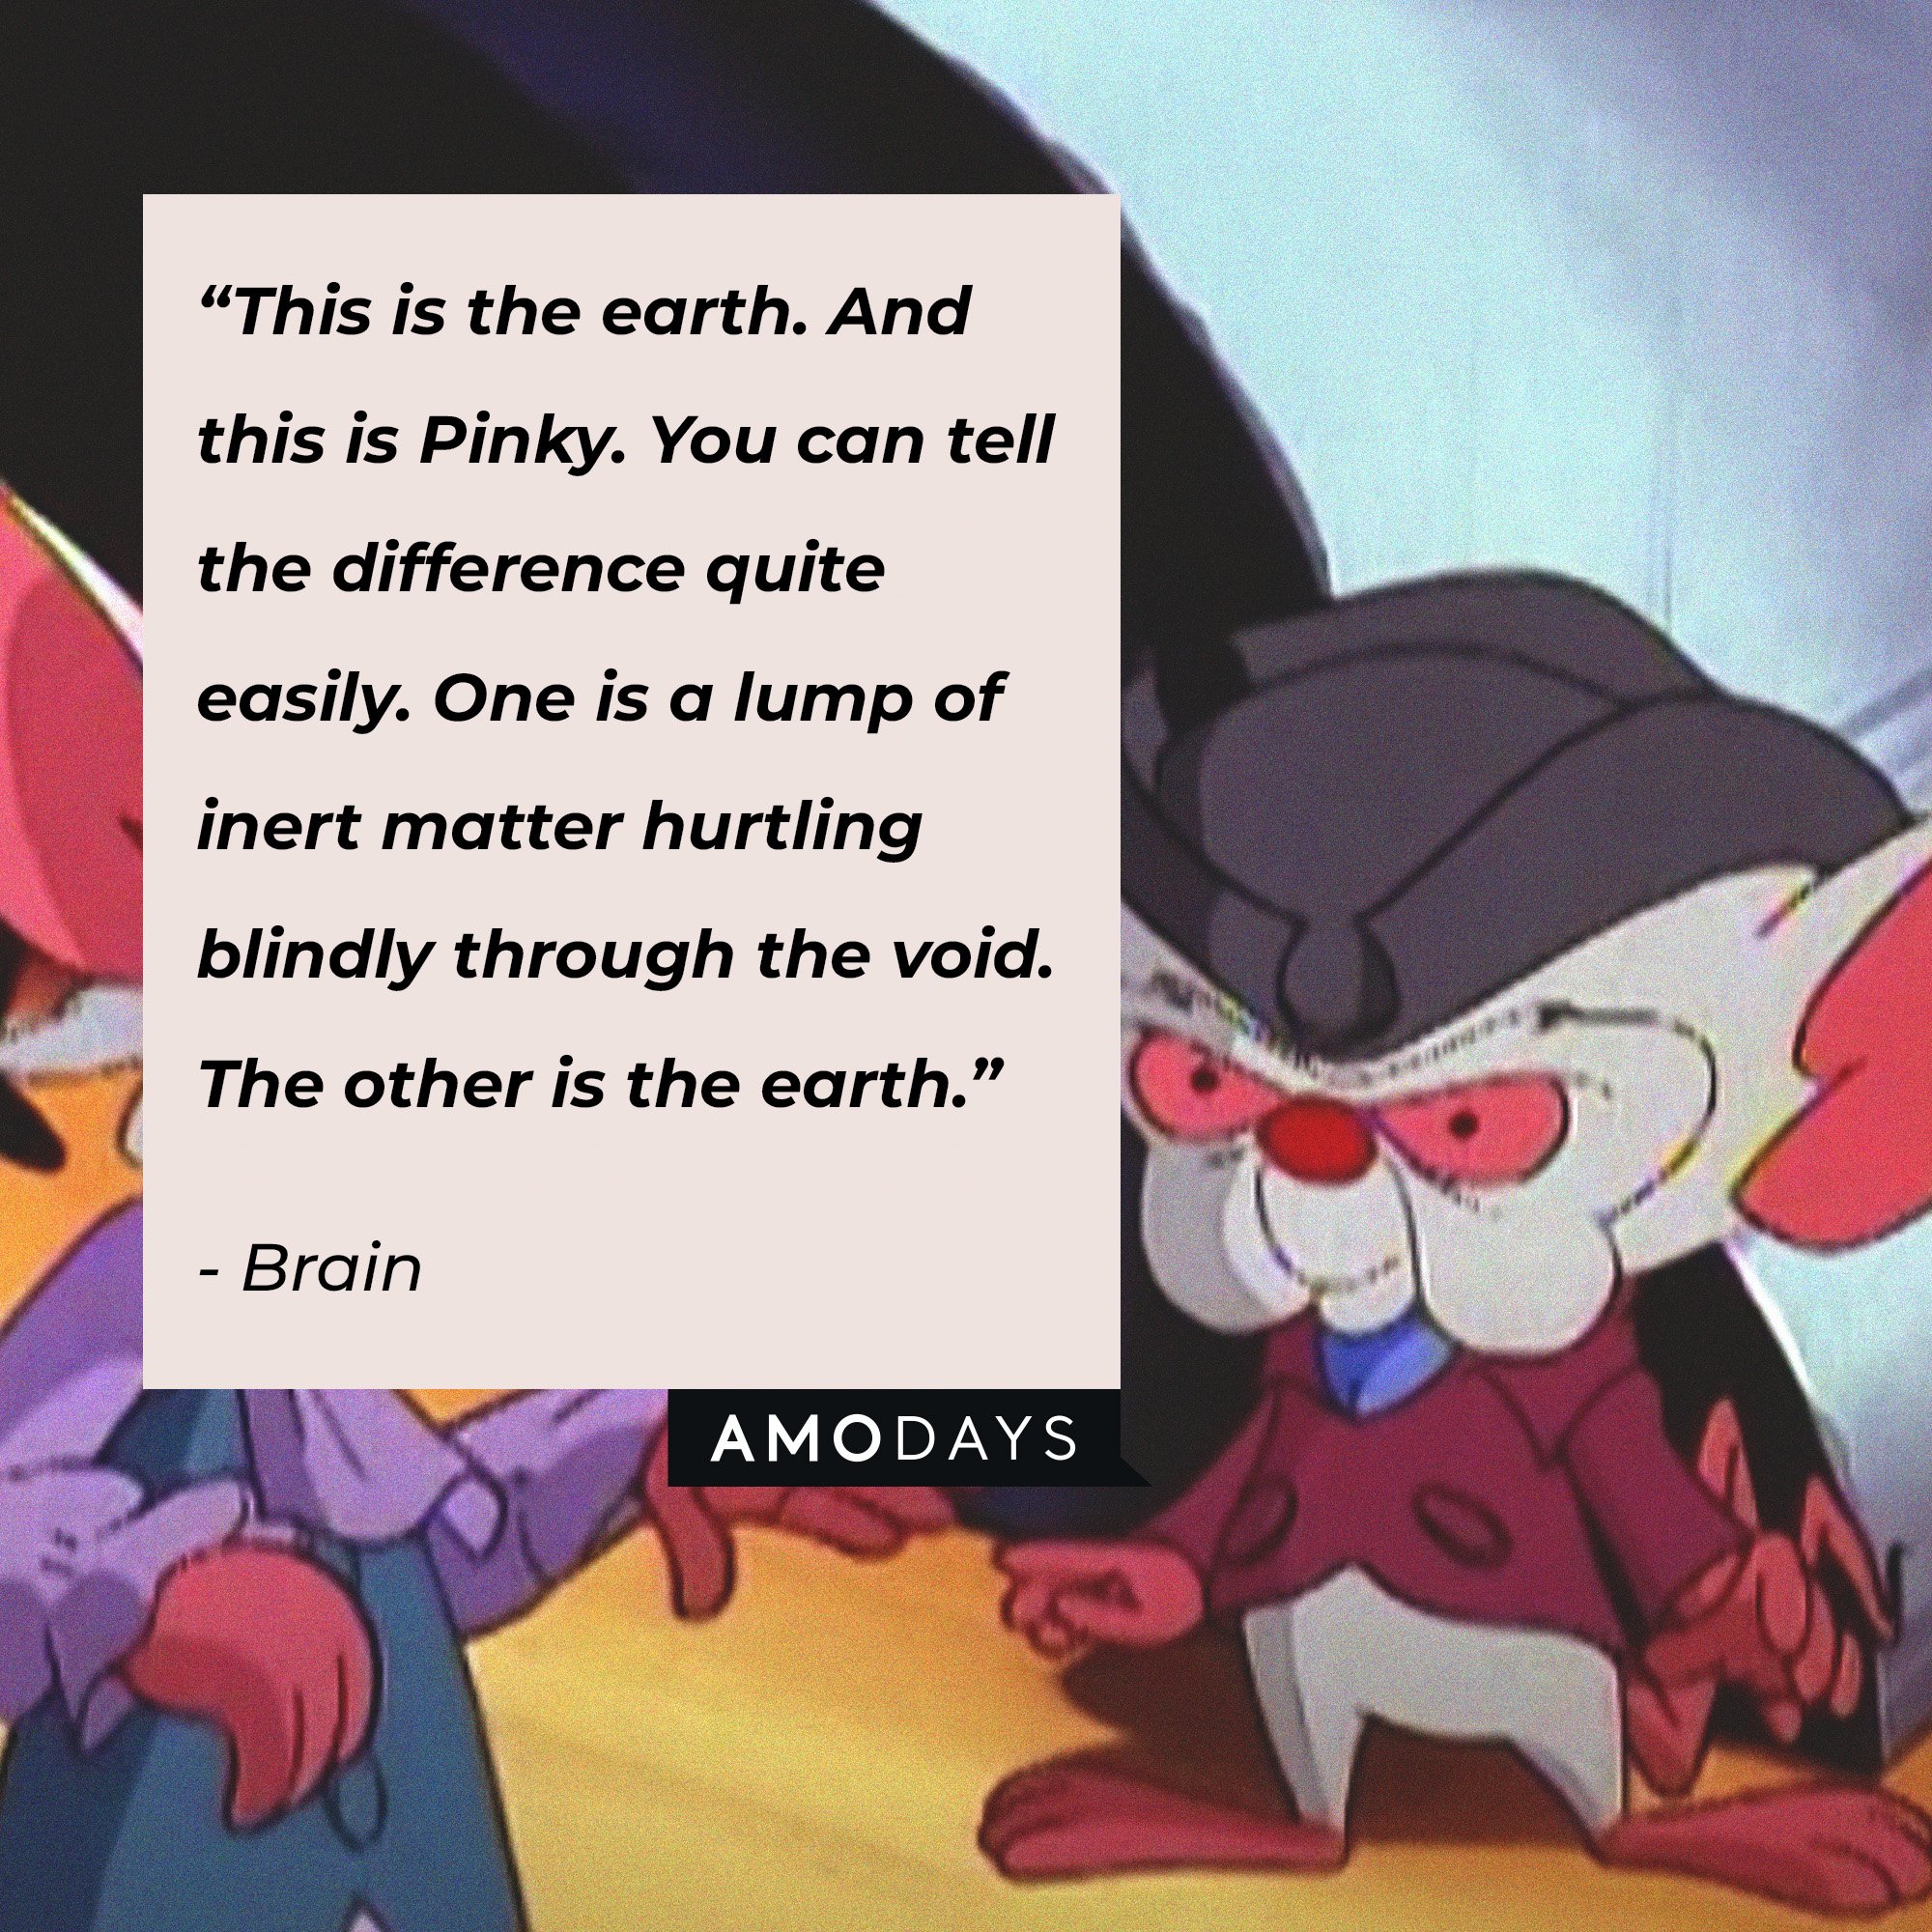 Brain's quote: “This is the earth. And this is Pinky. You can tell the difference quite easily. One is a lump of inert matter hurtling blindly through the void. The other is the earth.” | Image: AmoDays